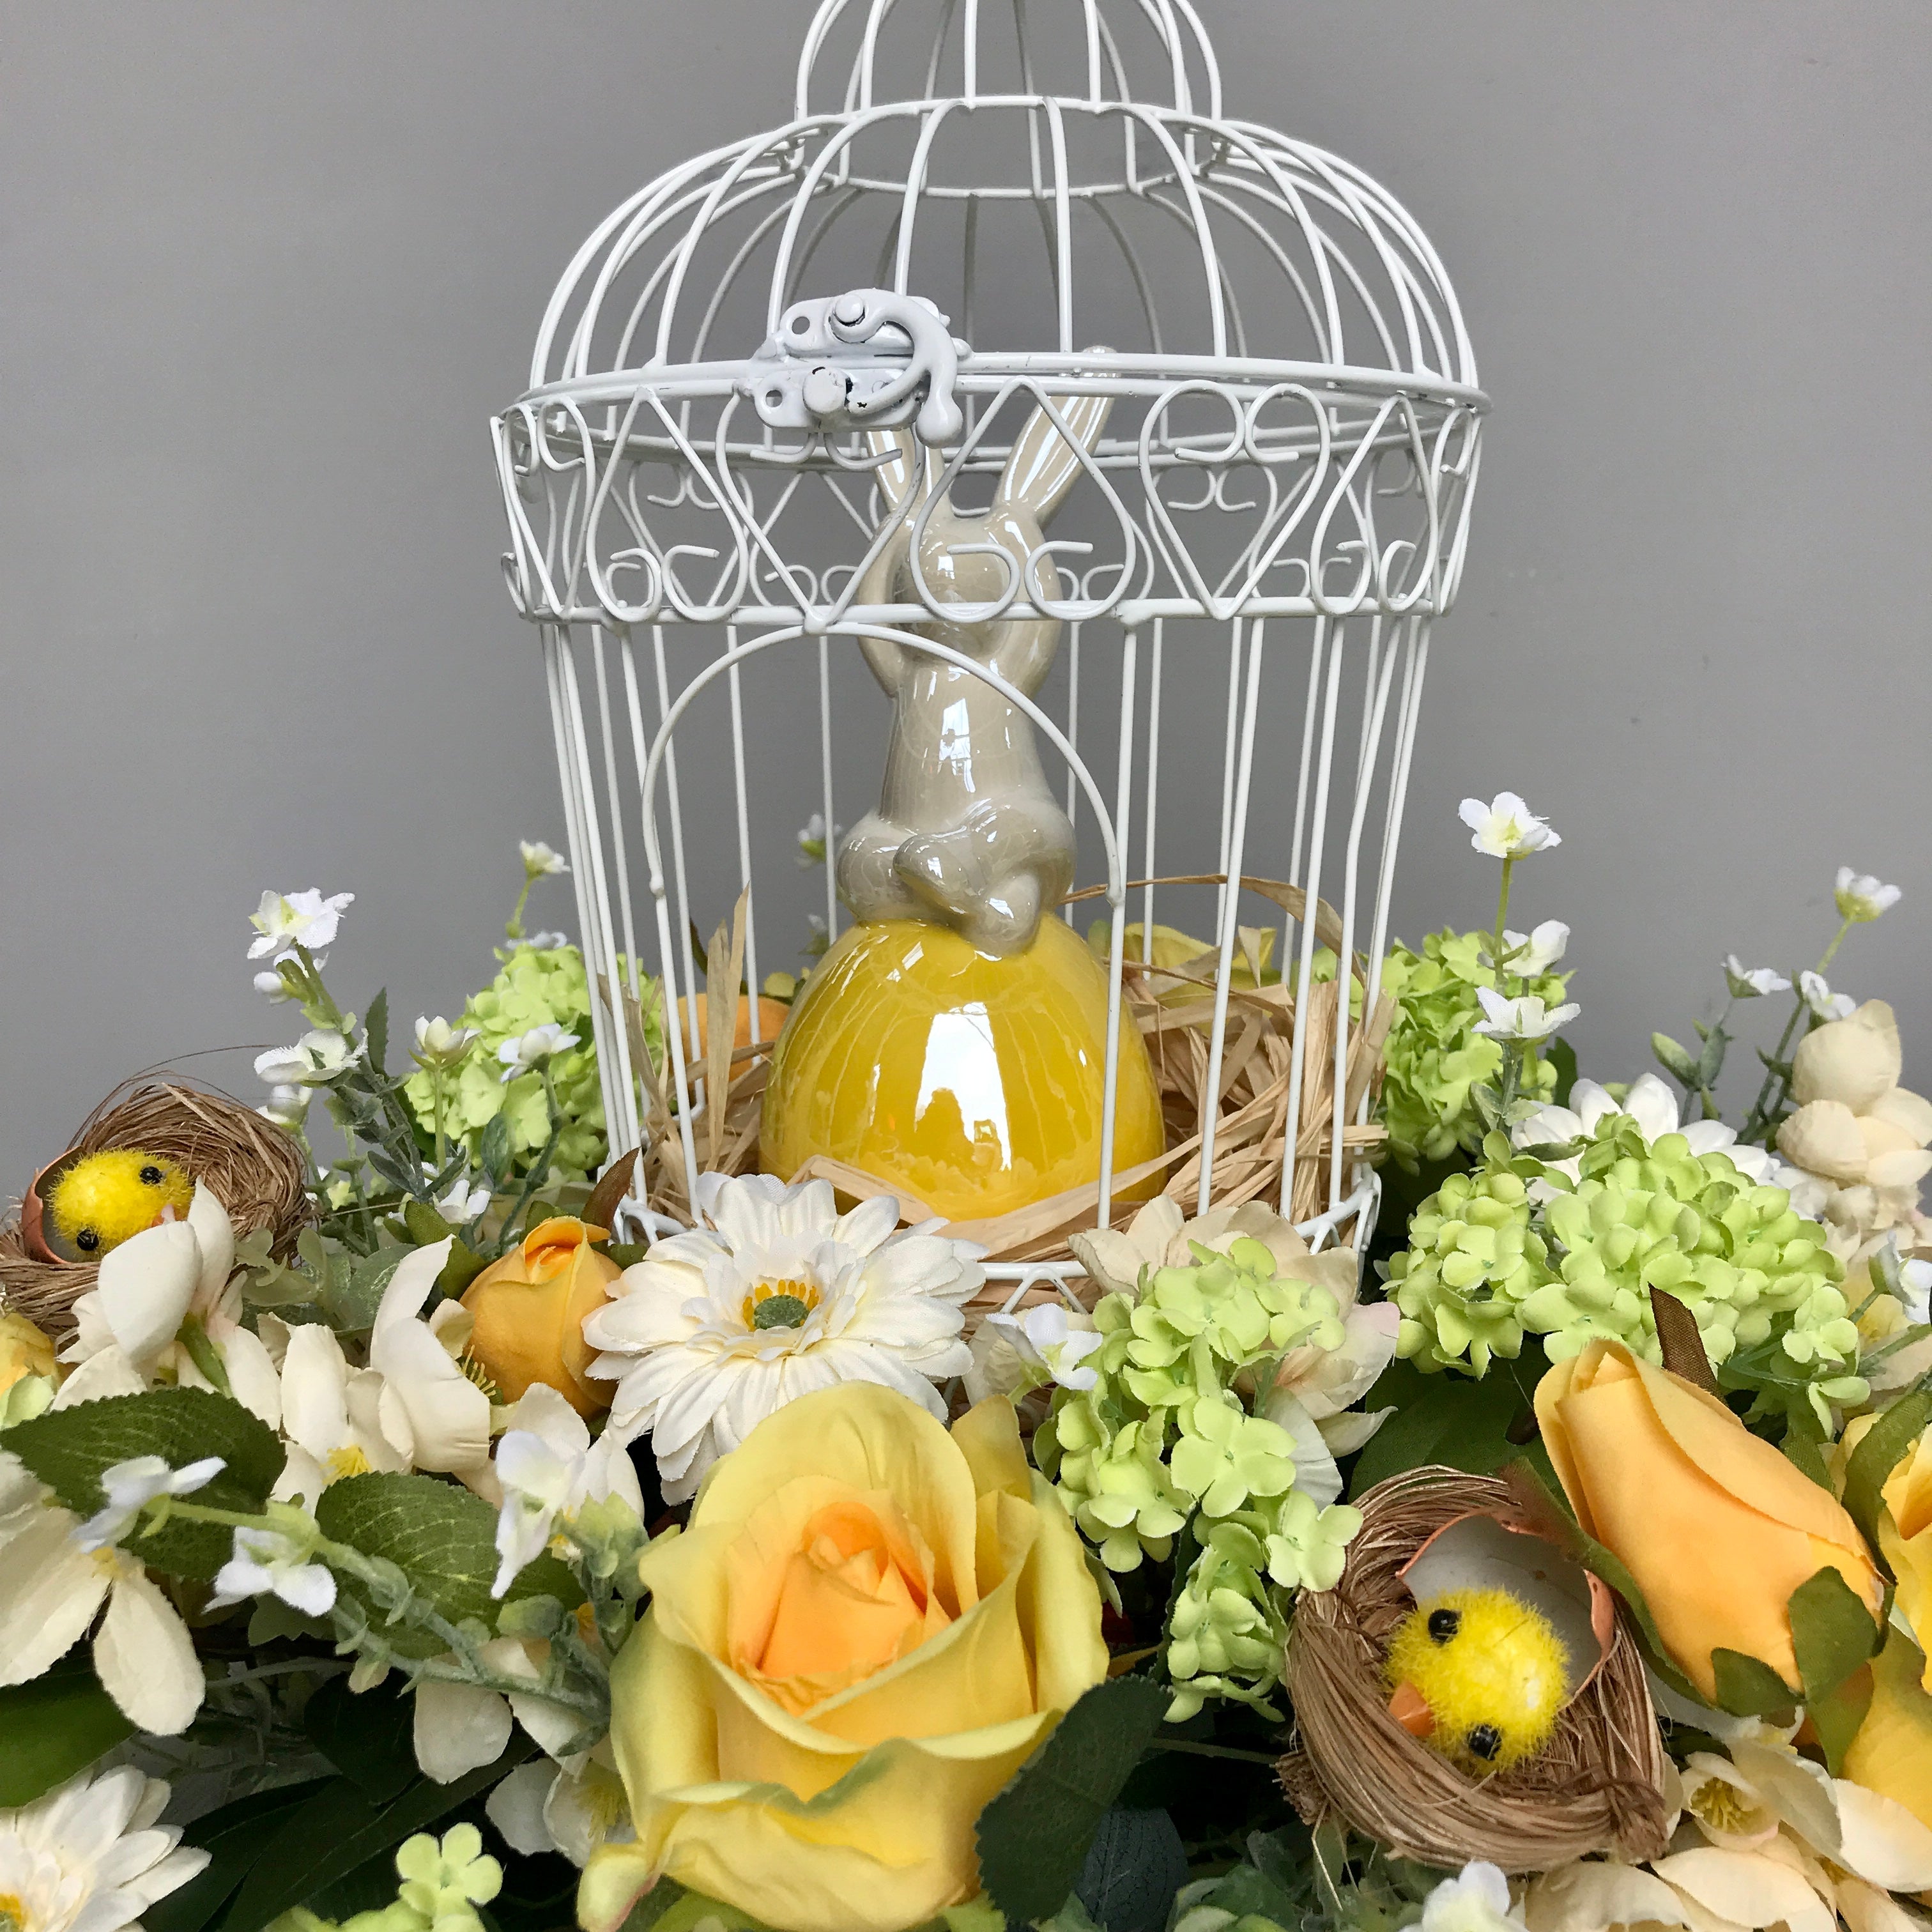 Our Easter Birdcage